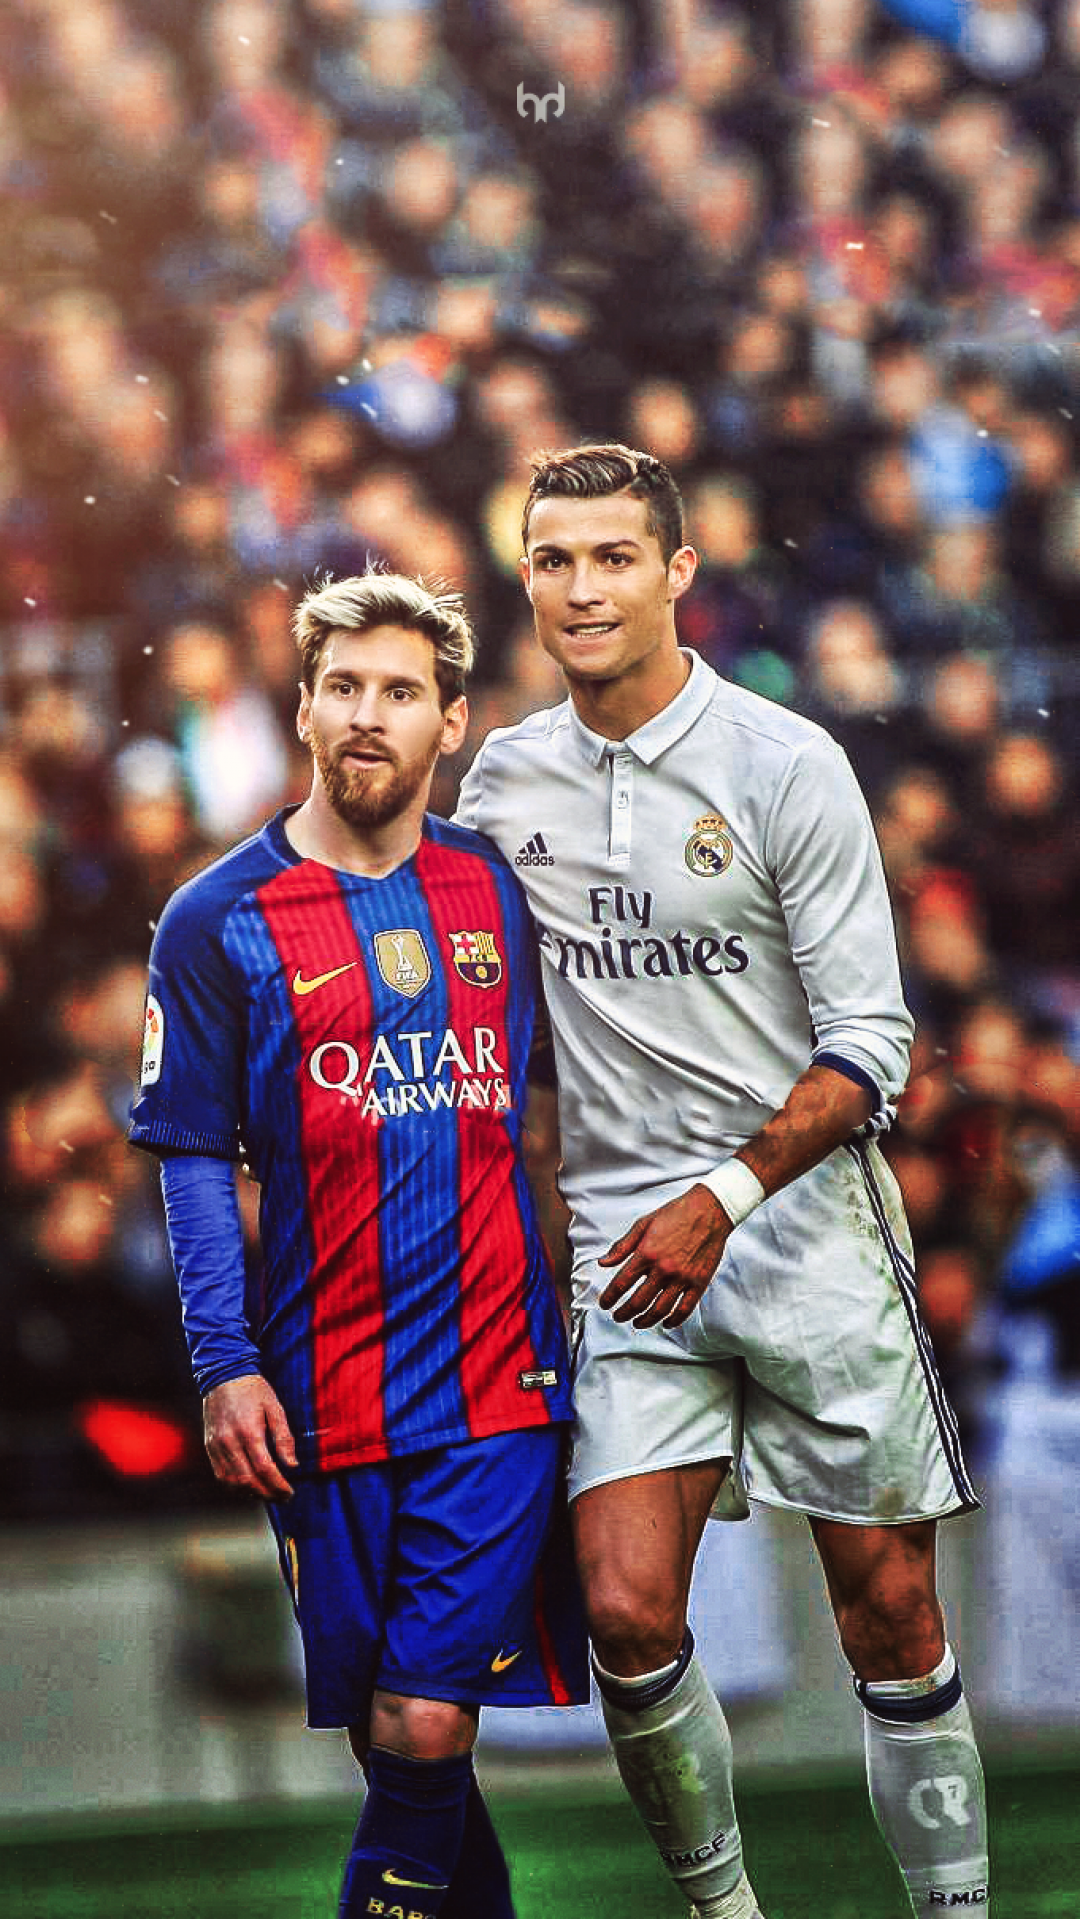 messi and ronaldo wallpaper,soccer player,football player,player,product,team sport